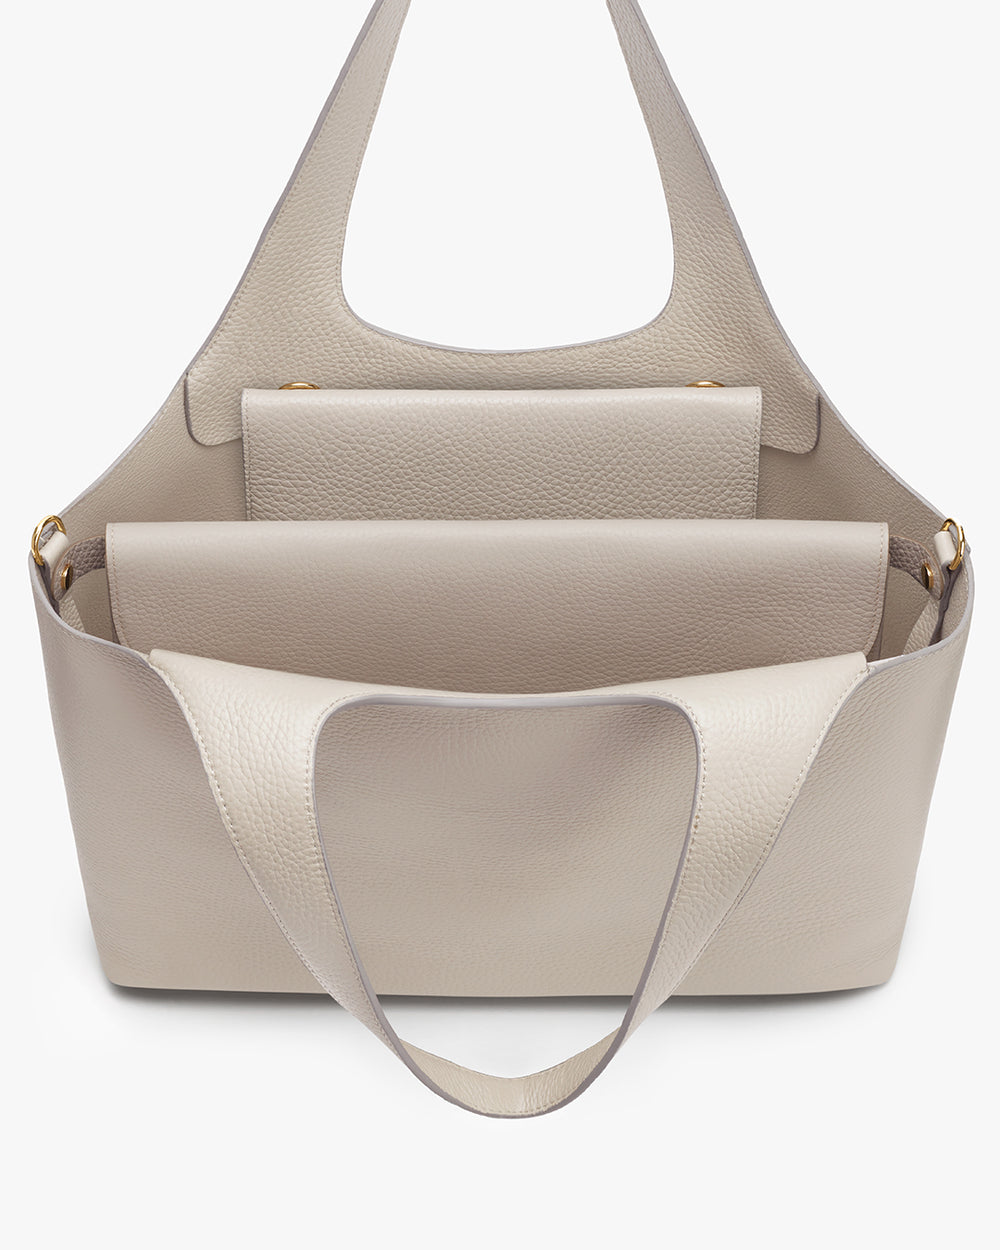 Handbag with top handle and front pocket, includes a smaller pouch inside.